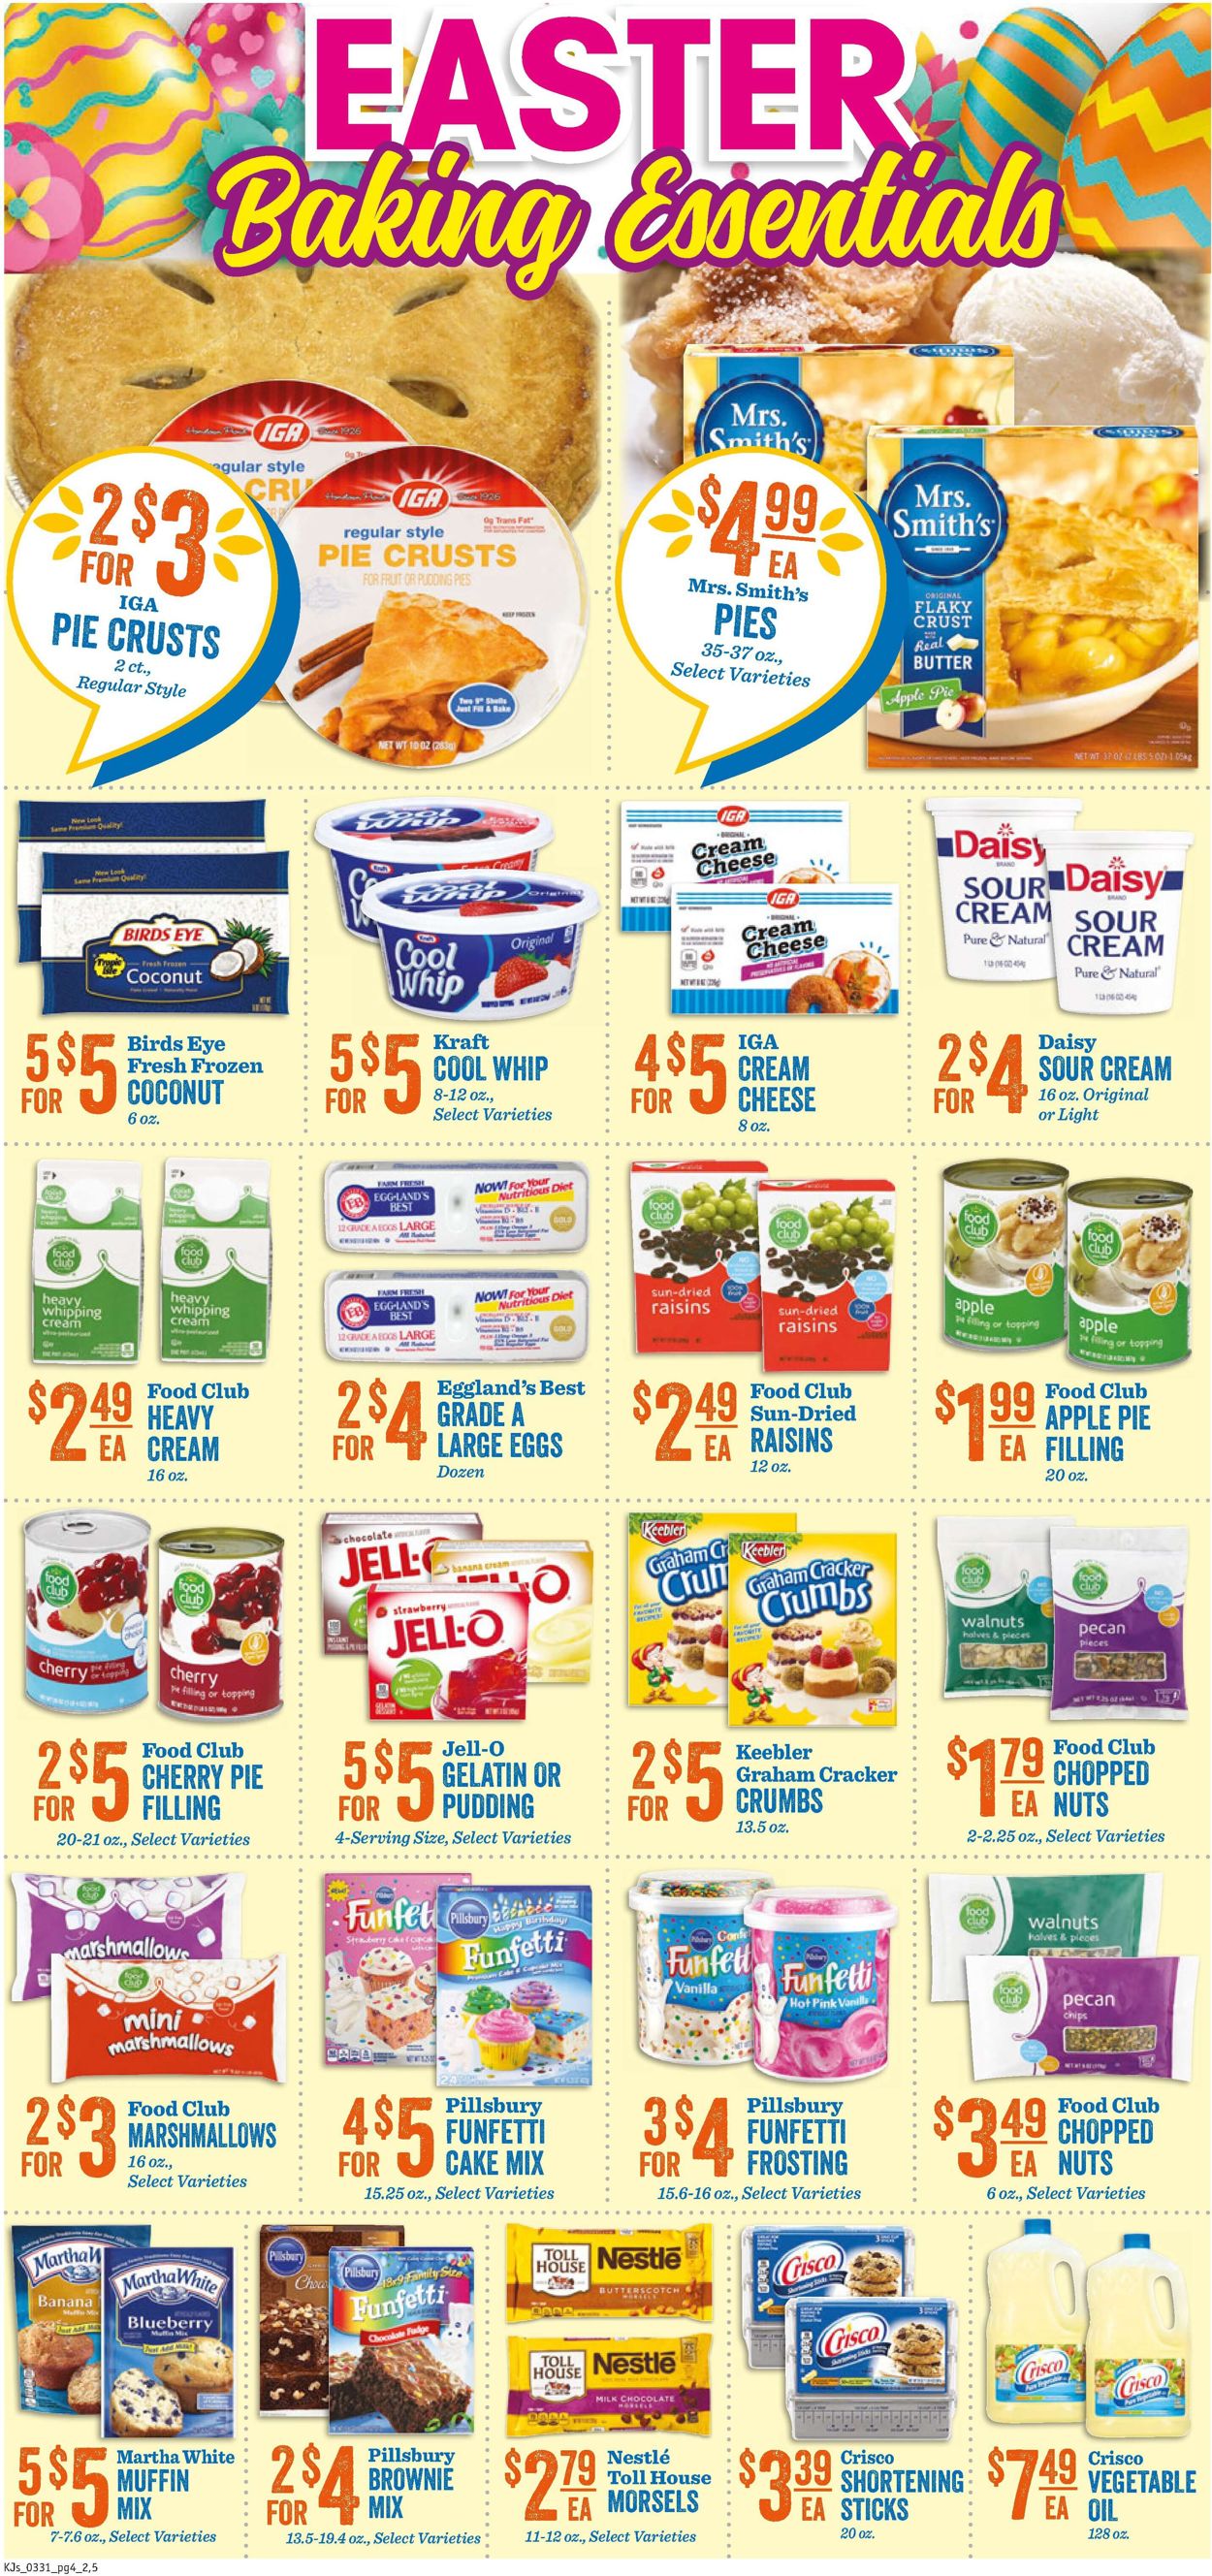 Catalogue KJ´s Market  Easter 2021 ad from 03/31/2021